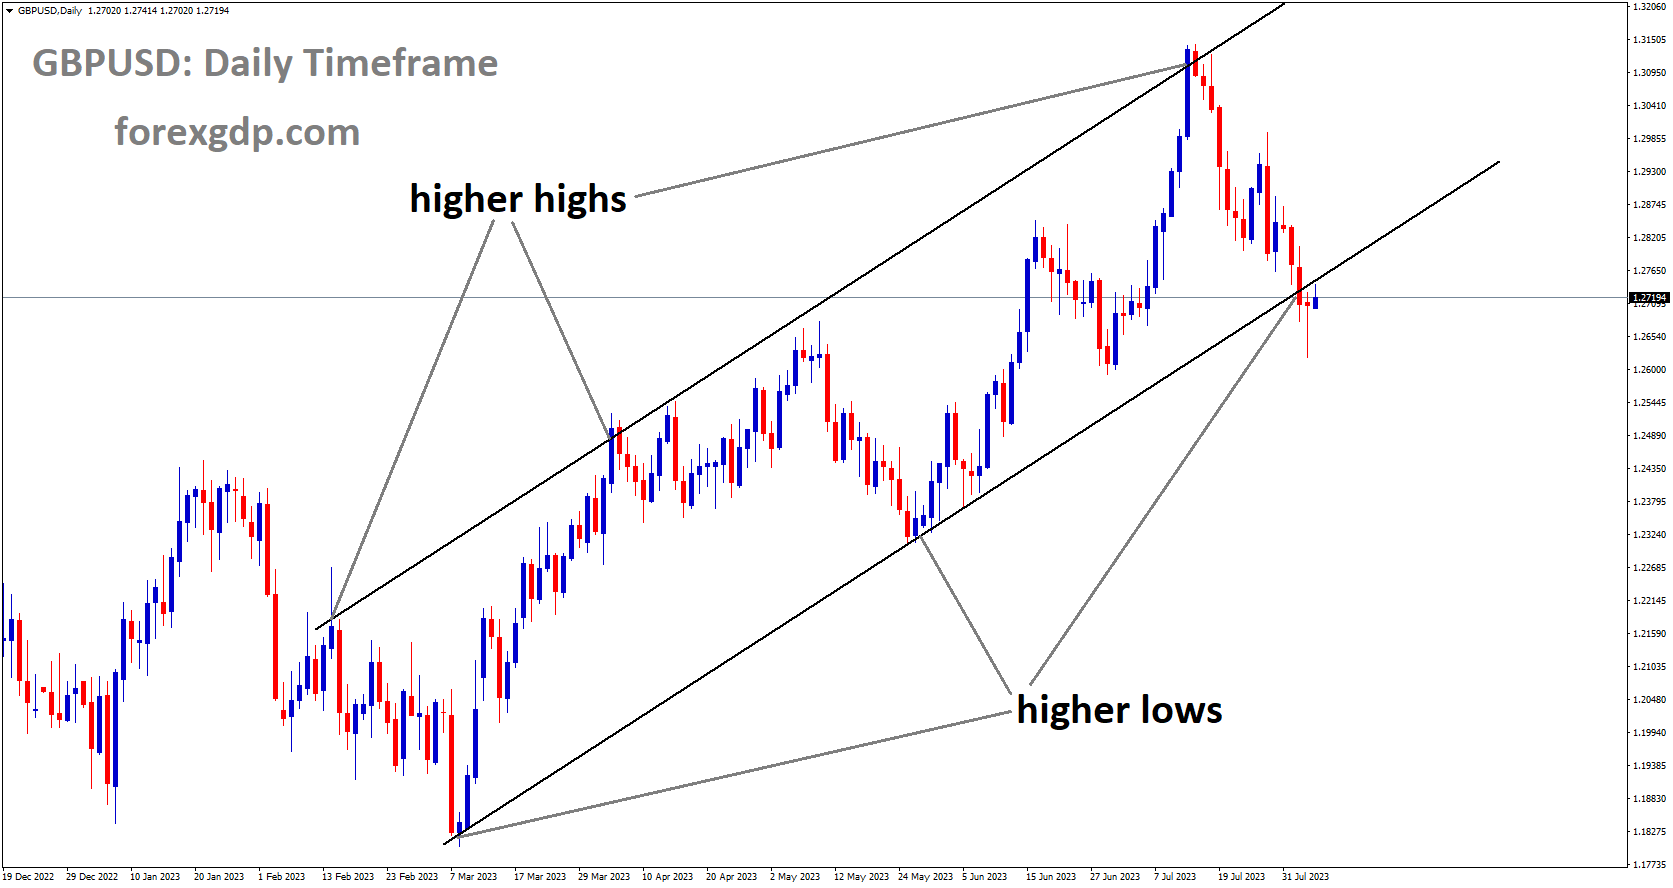 GBPUSD is moving in Ascending channel and market has reached higher low area of the channel.